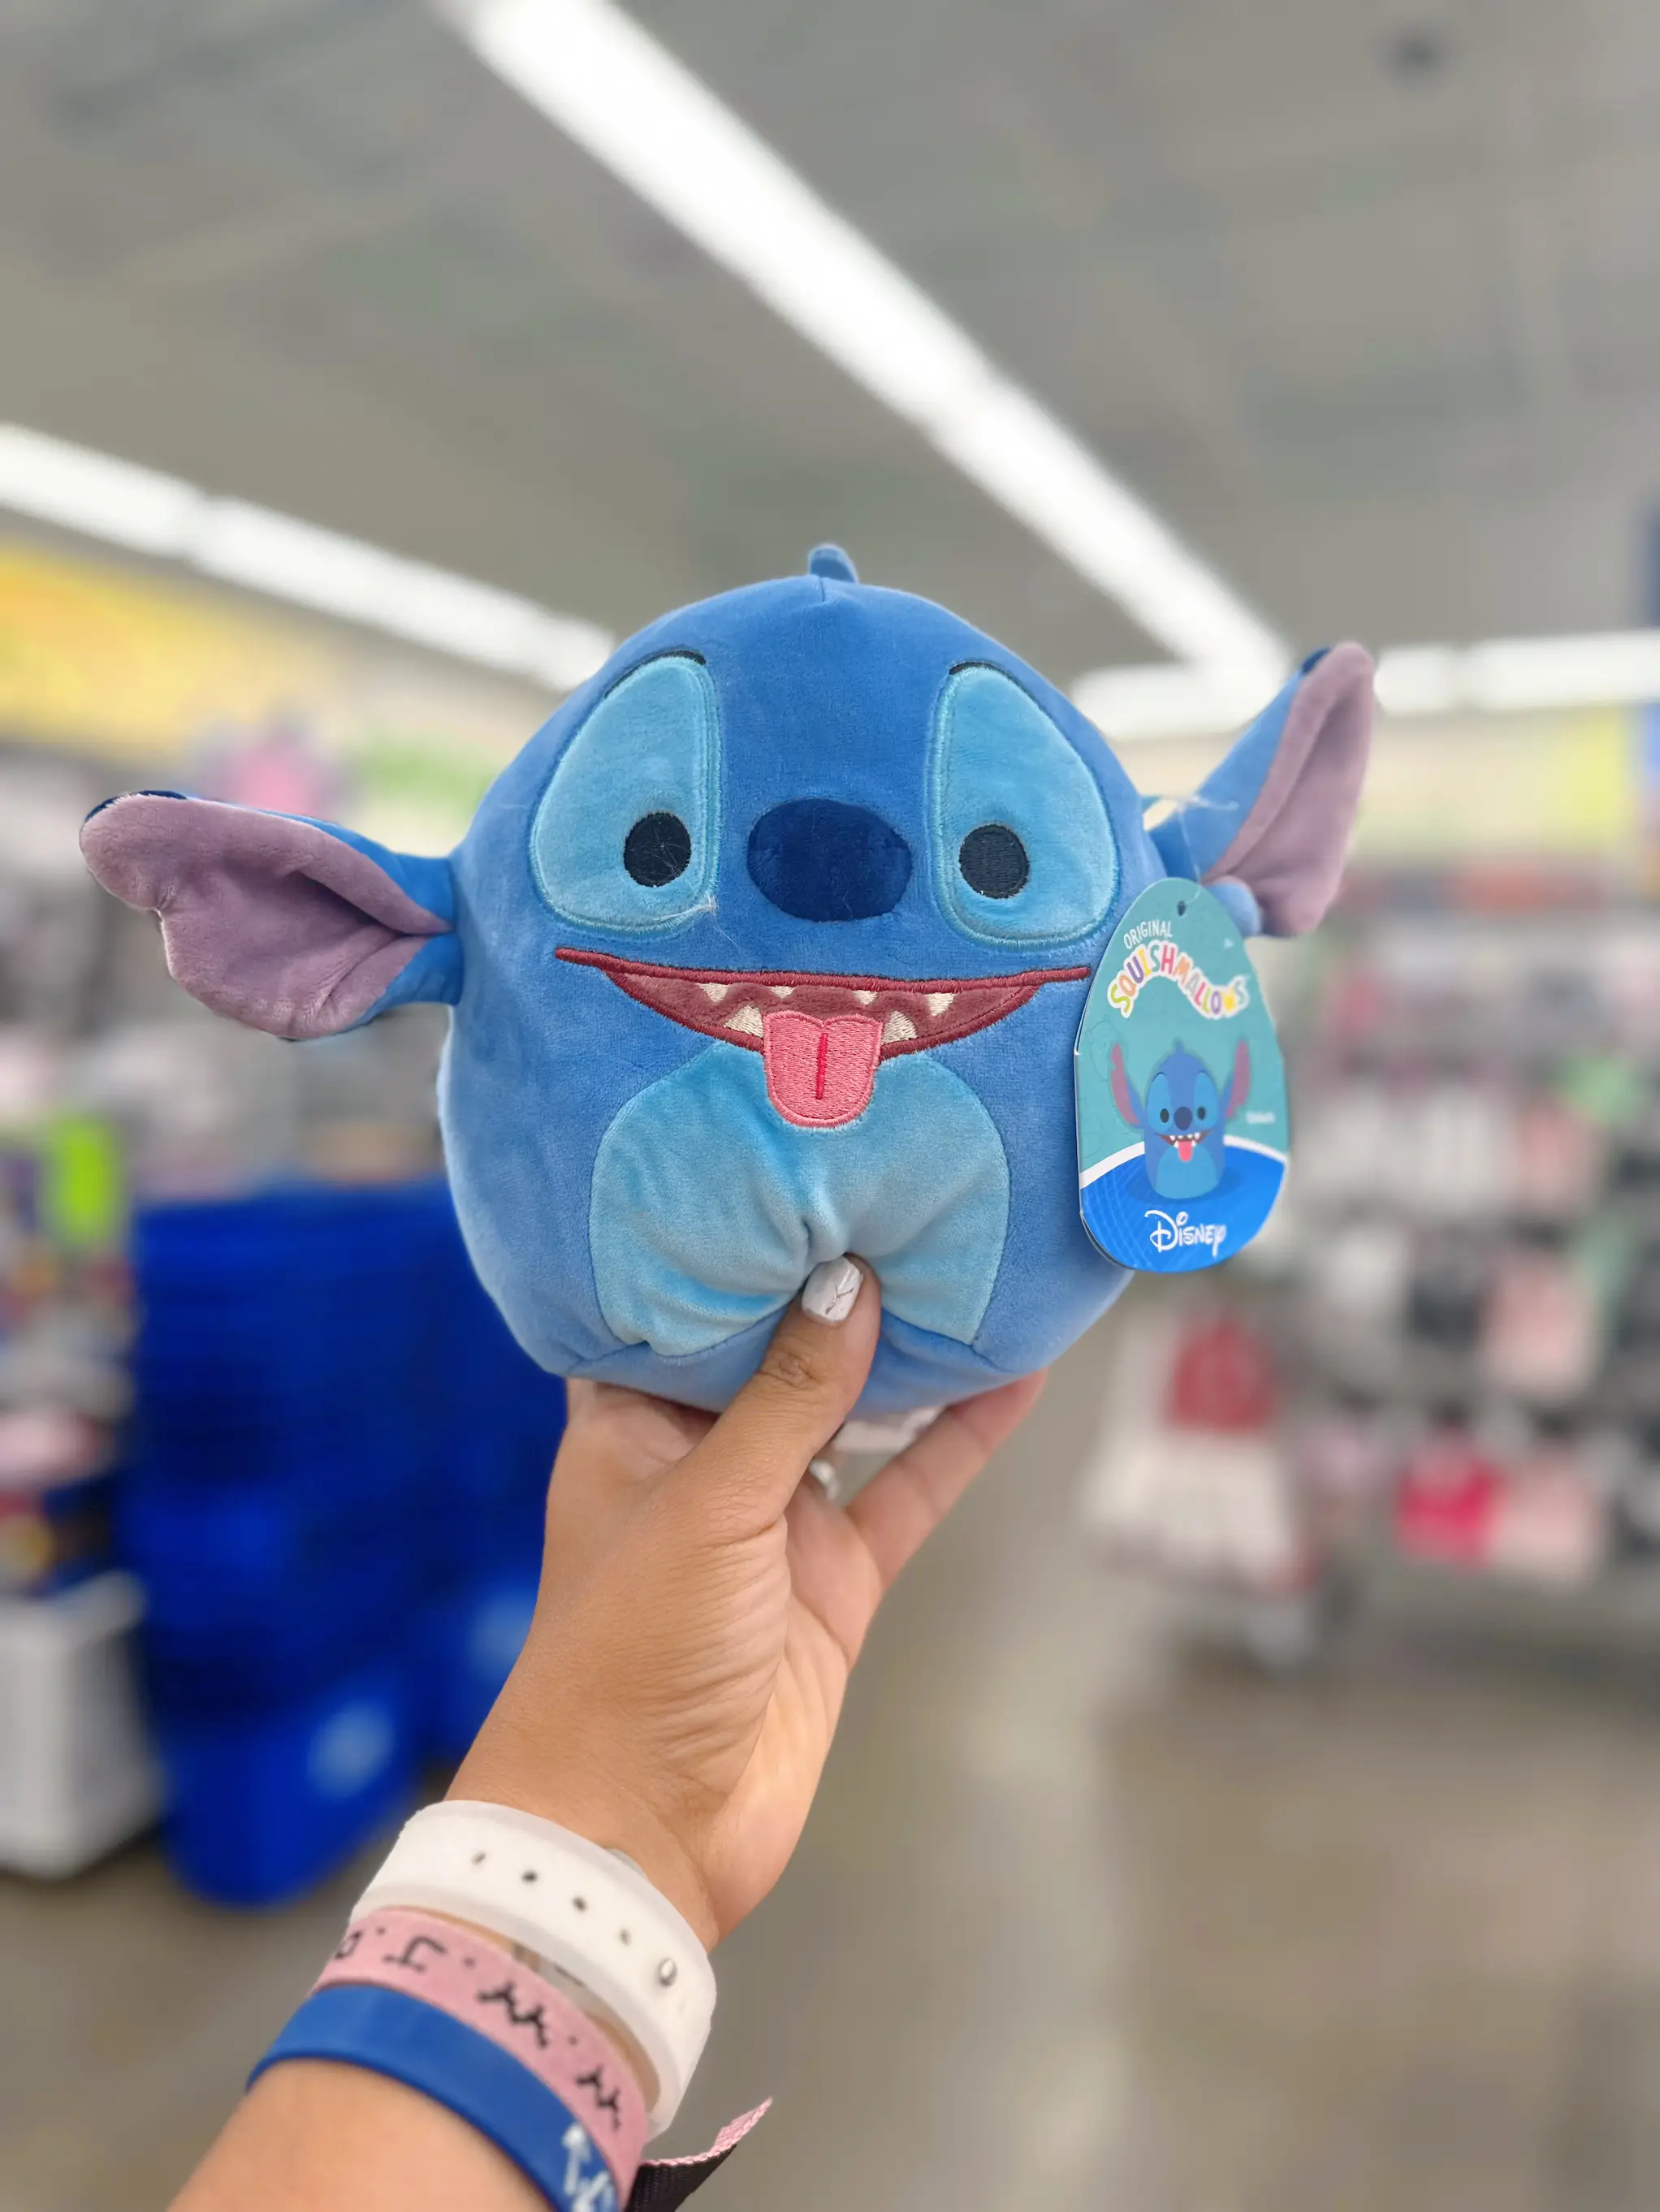 Primark - Aloha new Disney's Stitch bags 👋 💙 Prices from £4